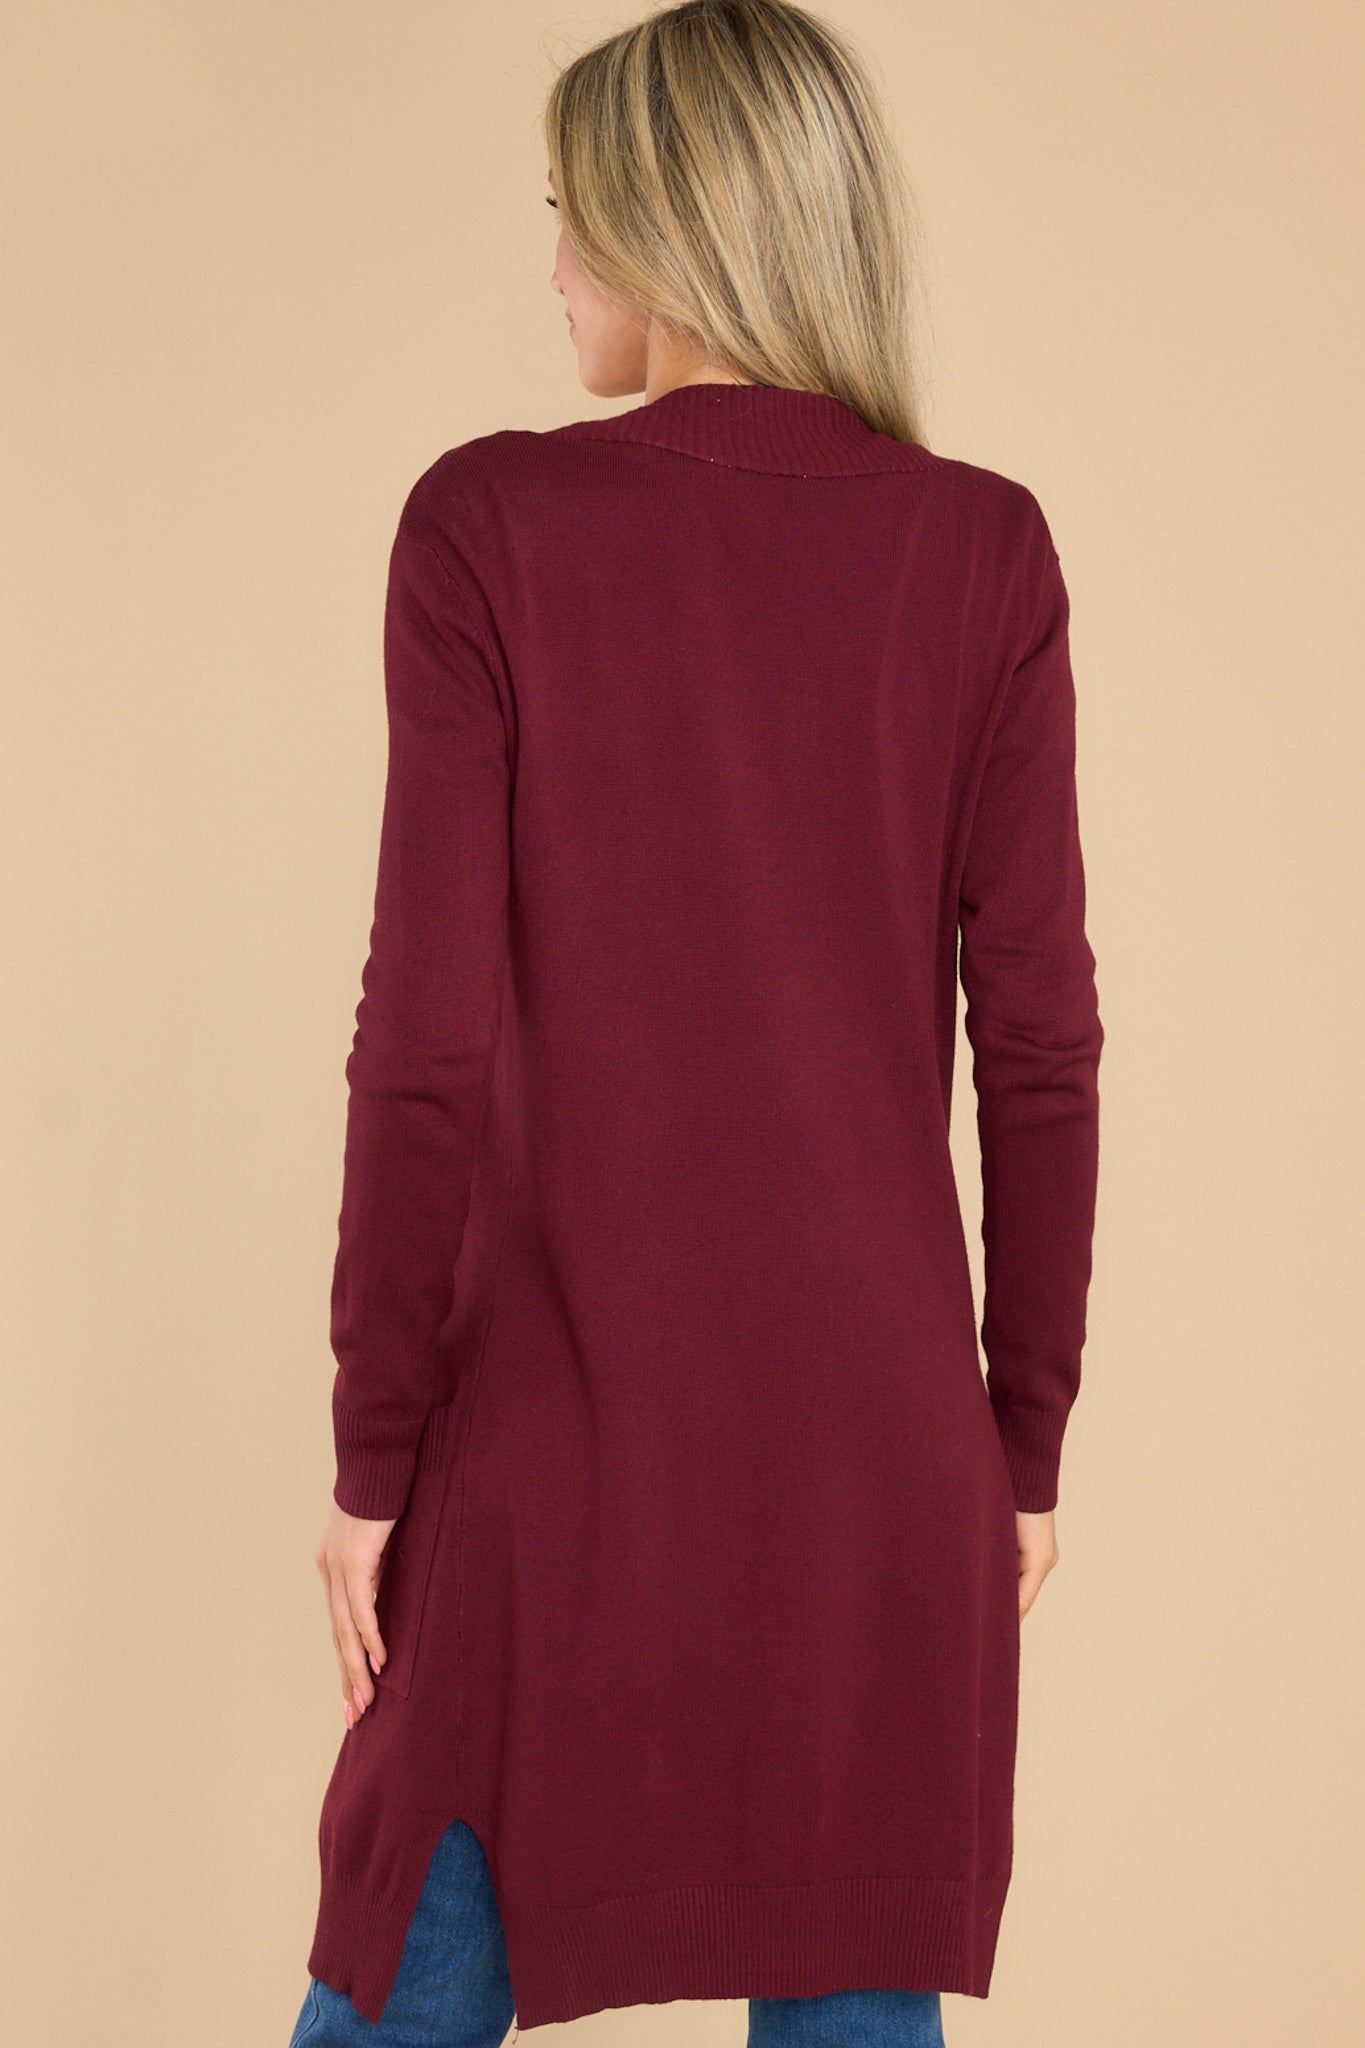 Back view of this cardigan that features an open front accompanied by ribbed details, straight long sleeves, small slits on the sides and functional front pockets.